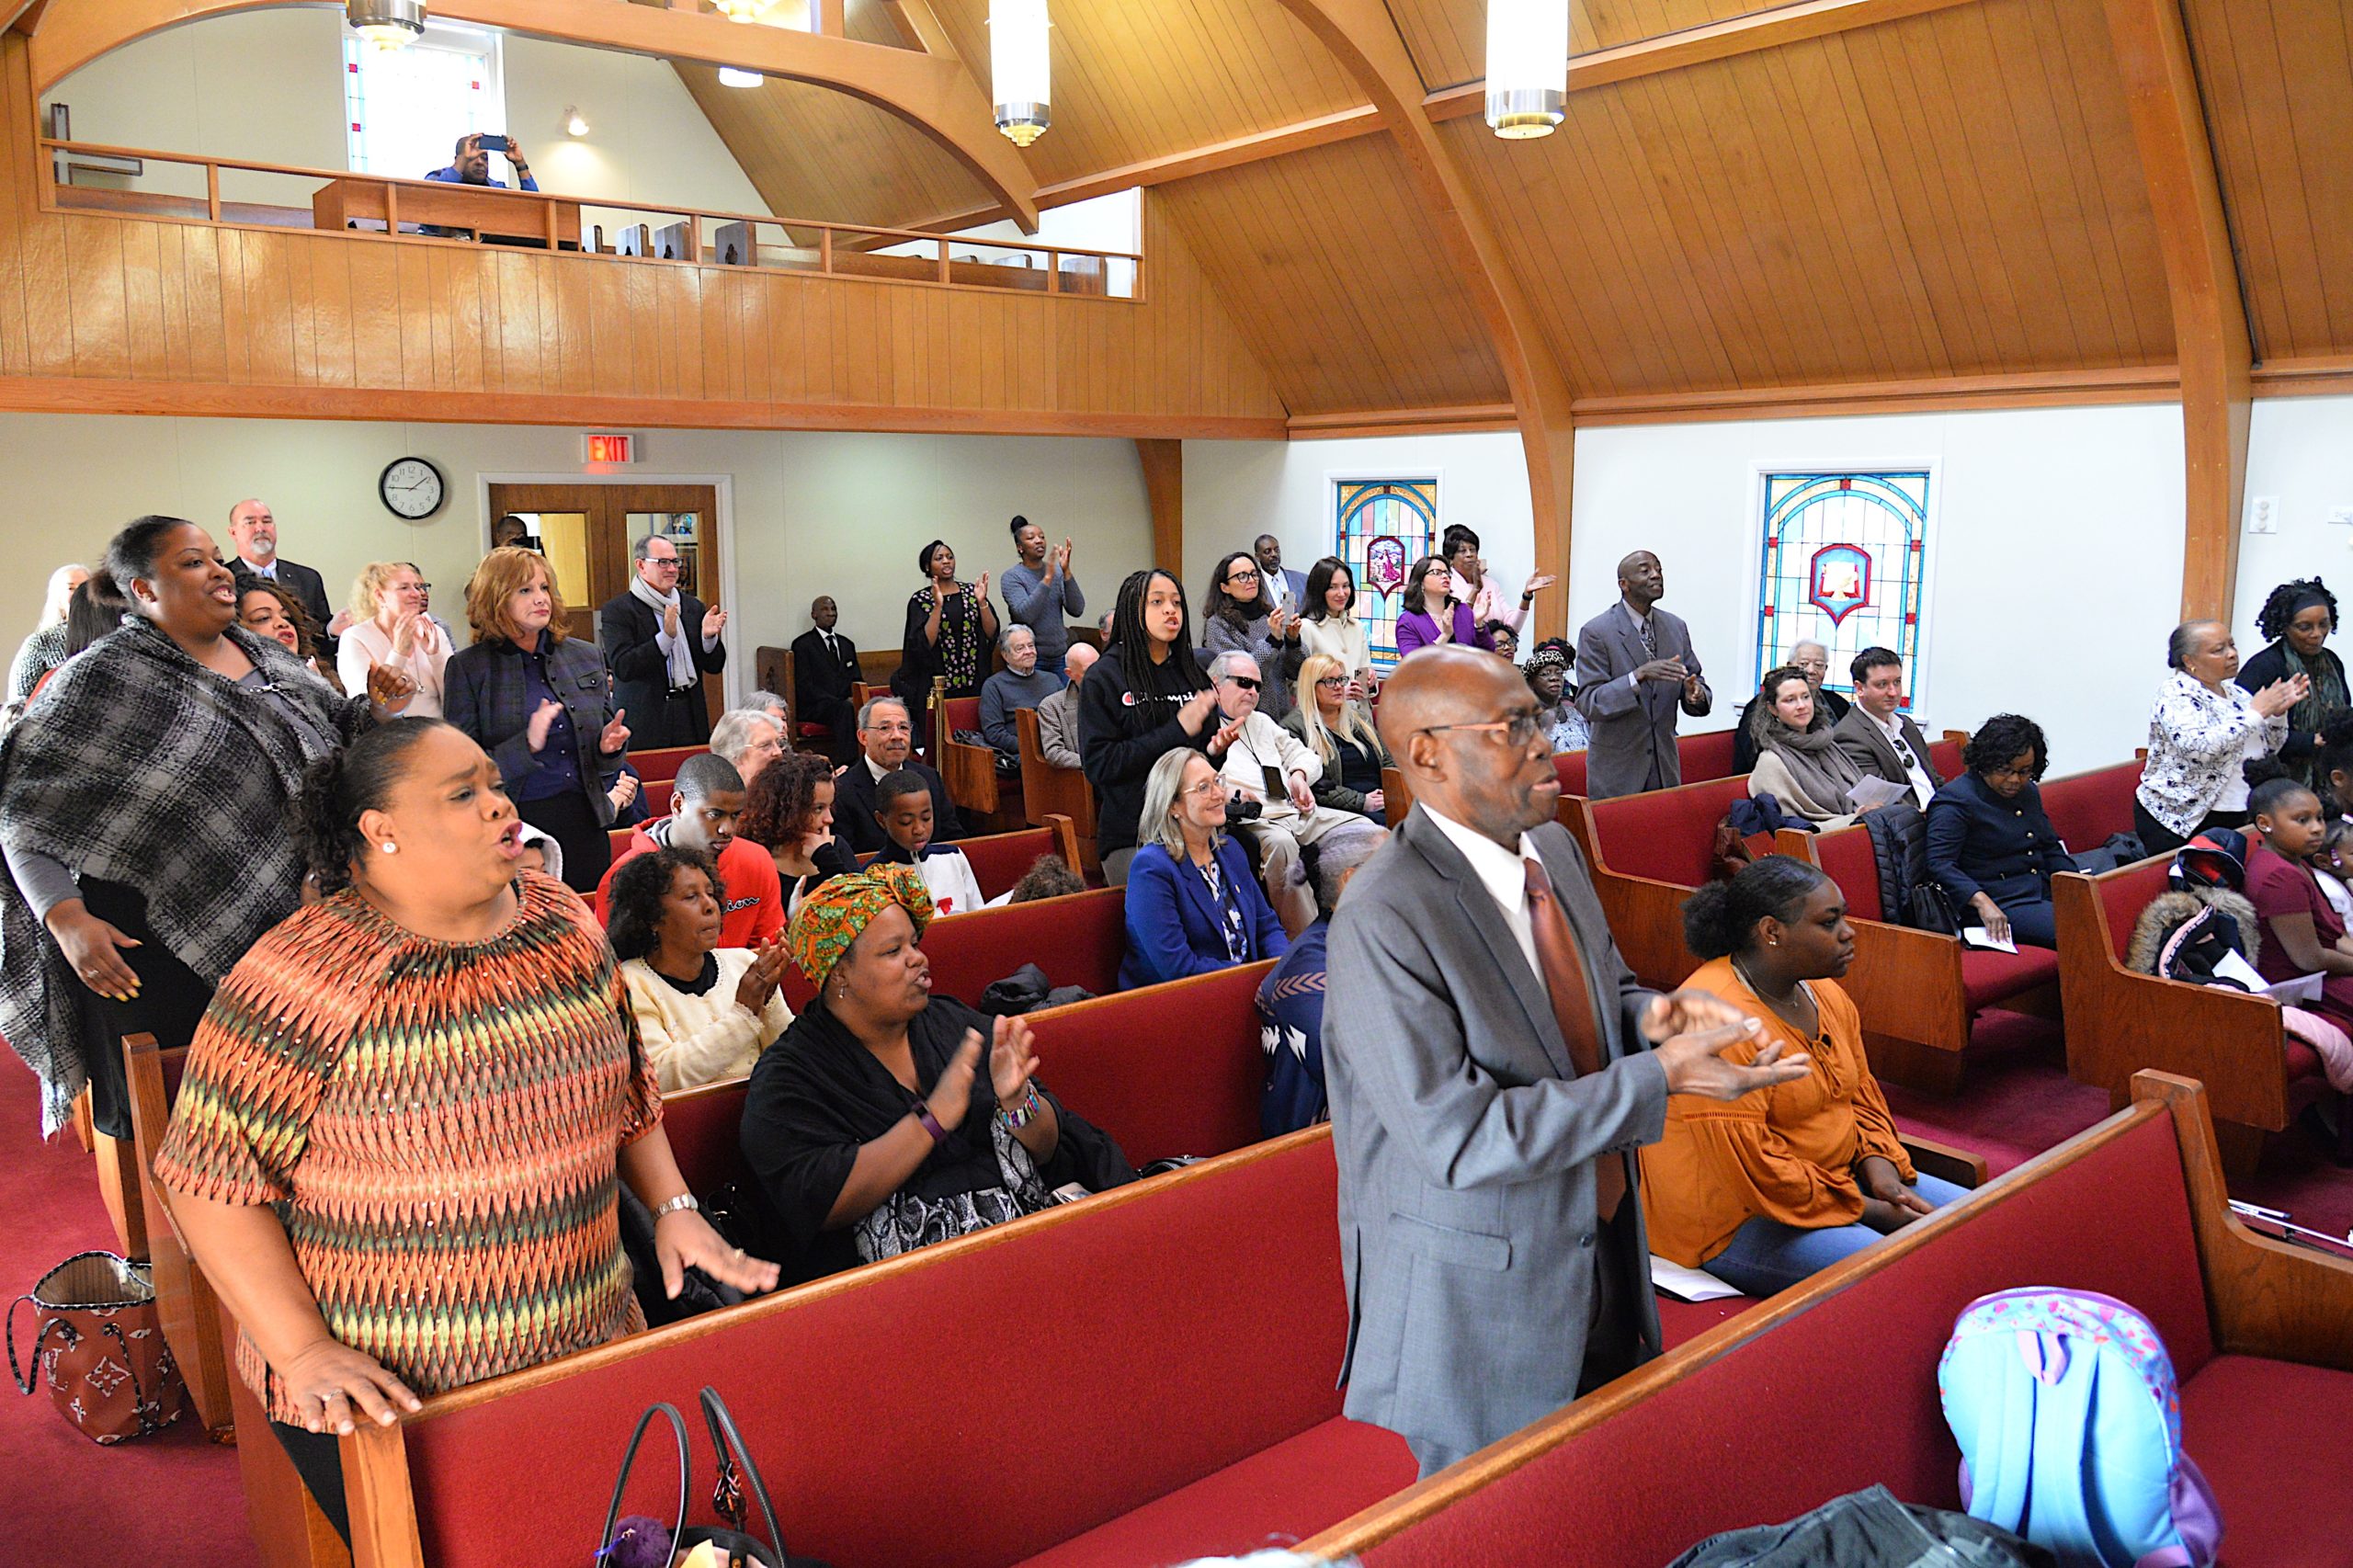 A special service honoring Martin Luther King Jr. took place at Calvary Baptist Church on Monday. The keynote speaker was Dr. Georgette L. Grier-Key. KYRIL BROMLEY